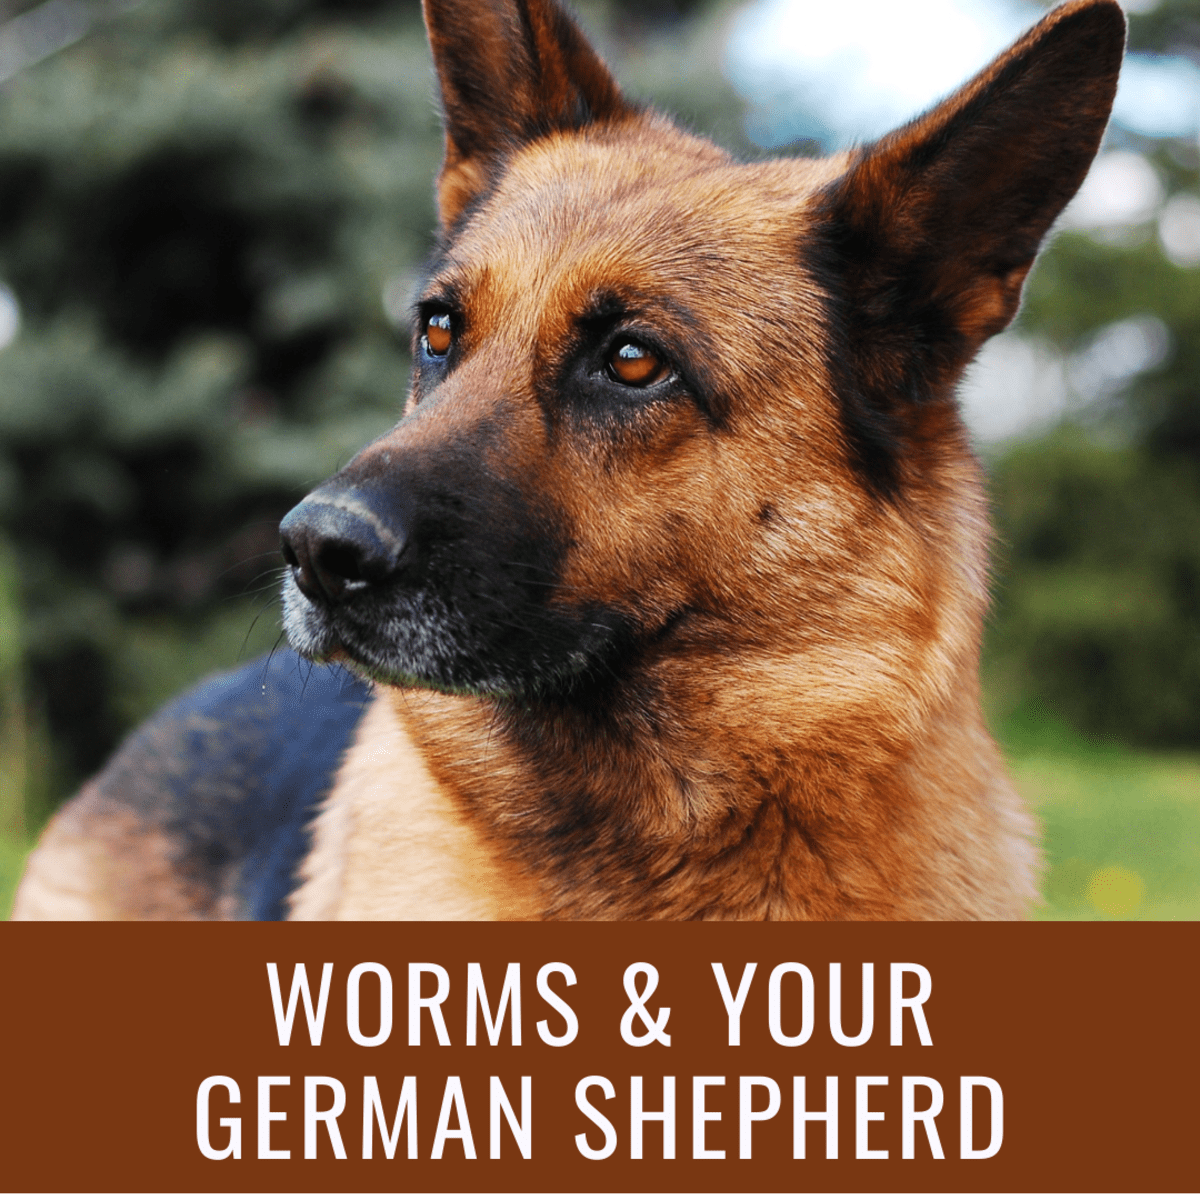 preventing and treating worms in german shepherds